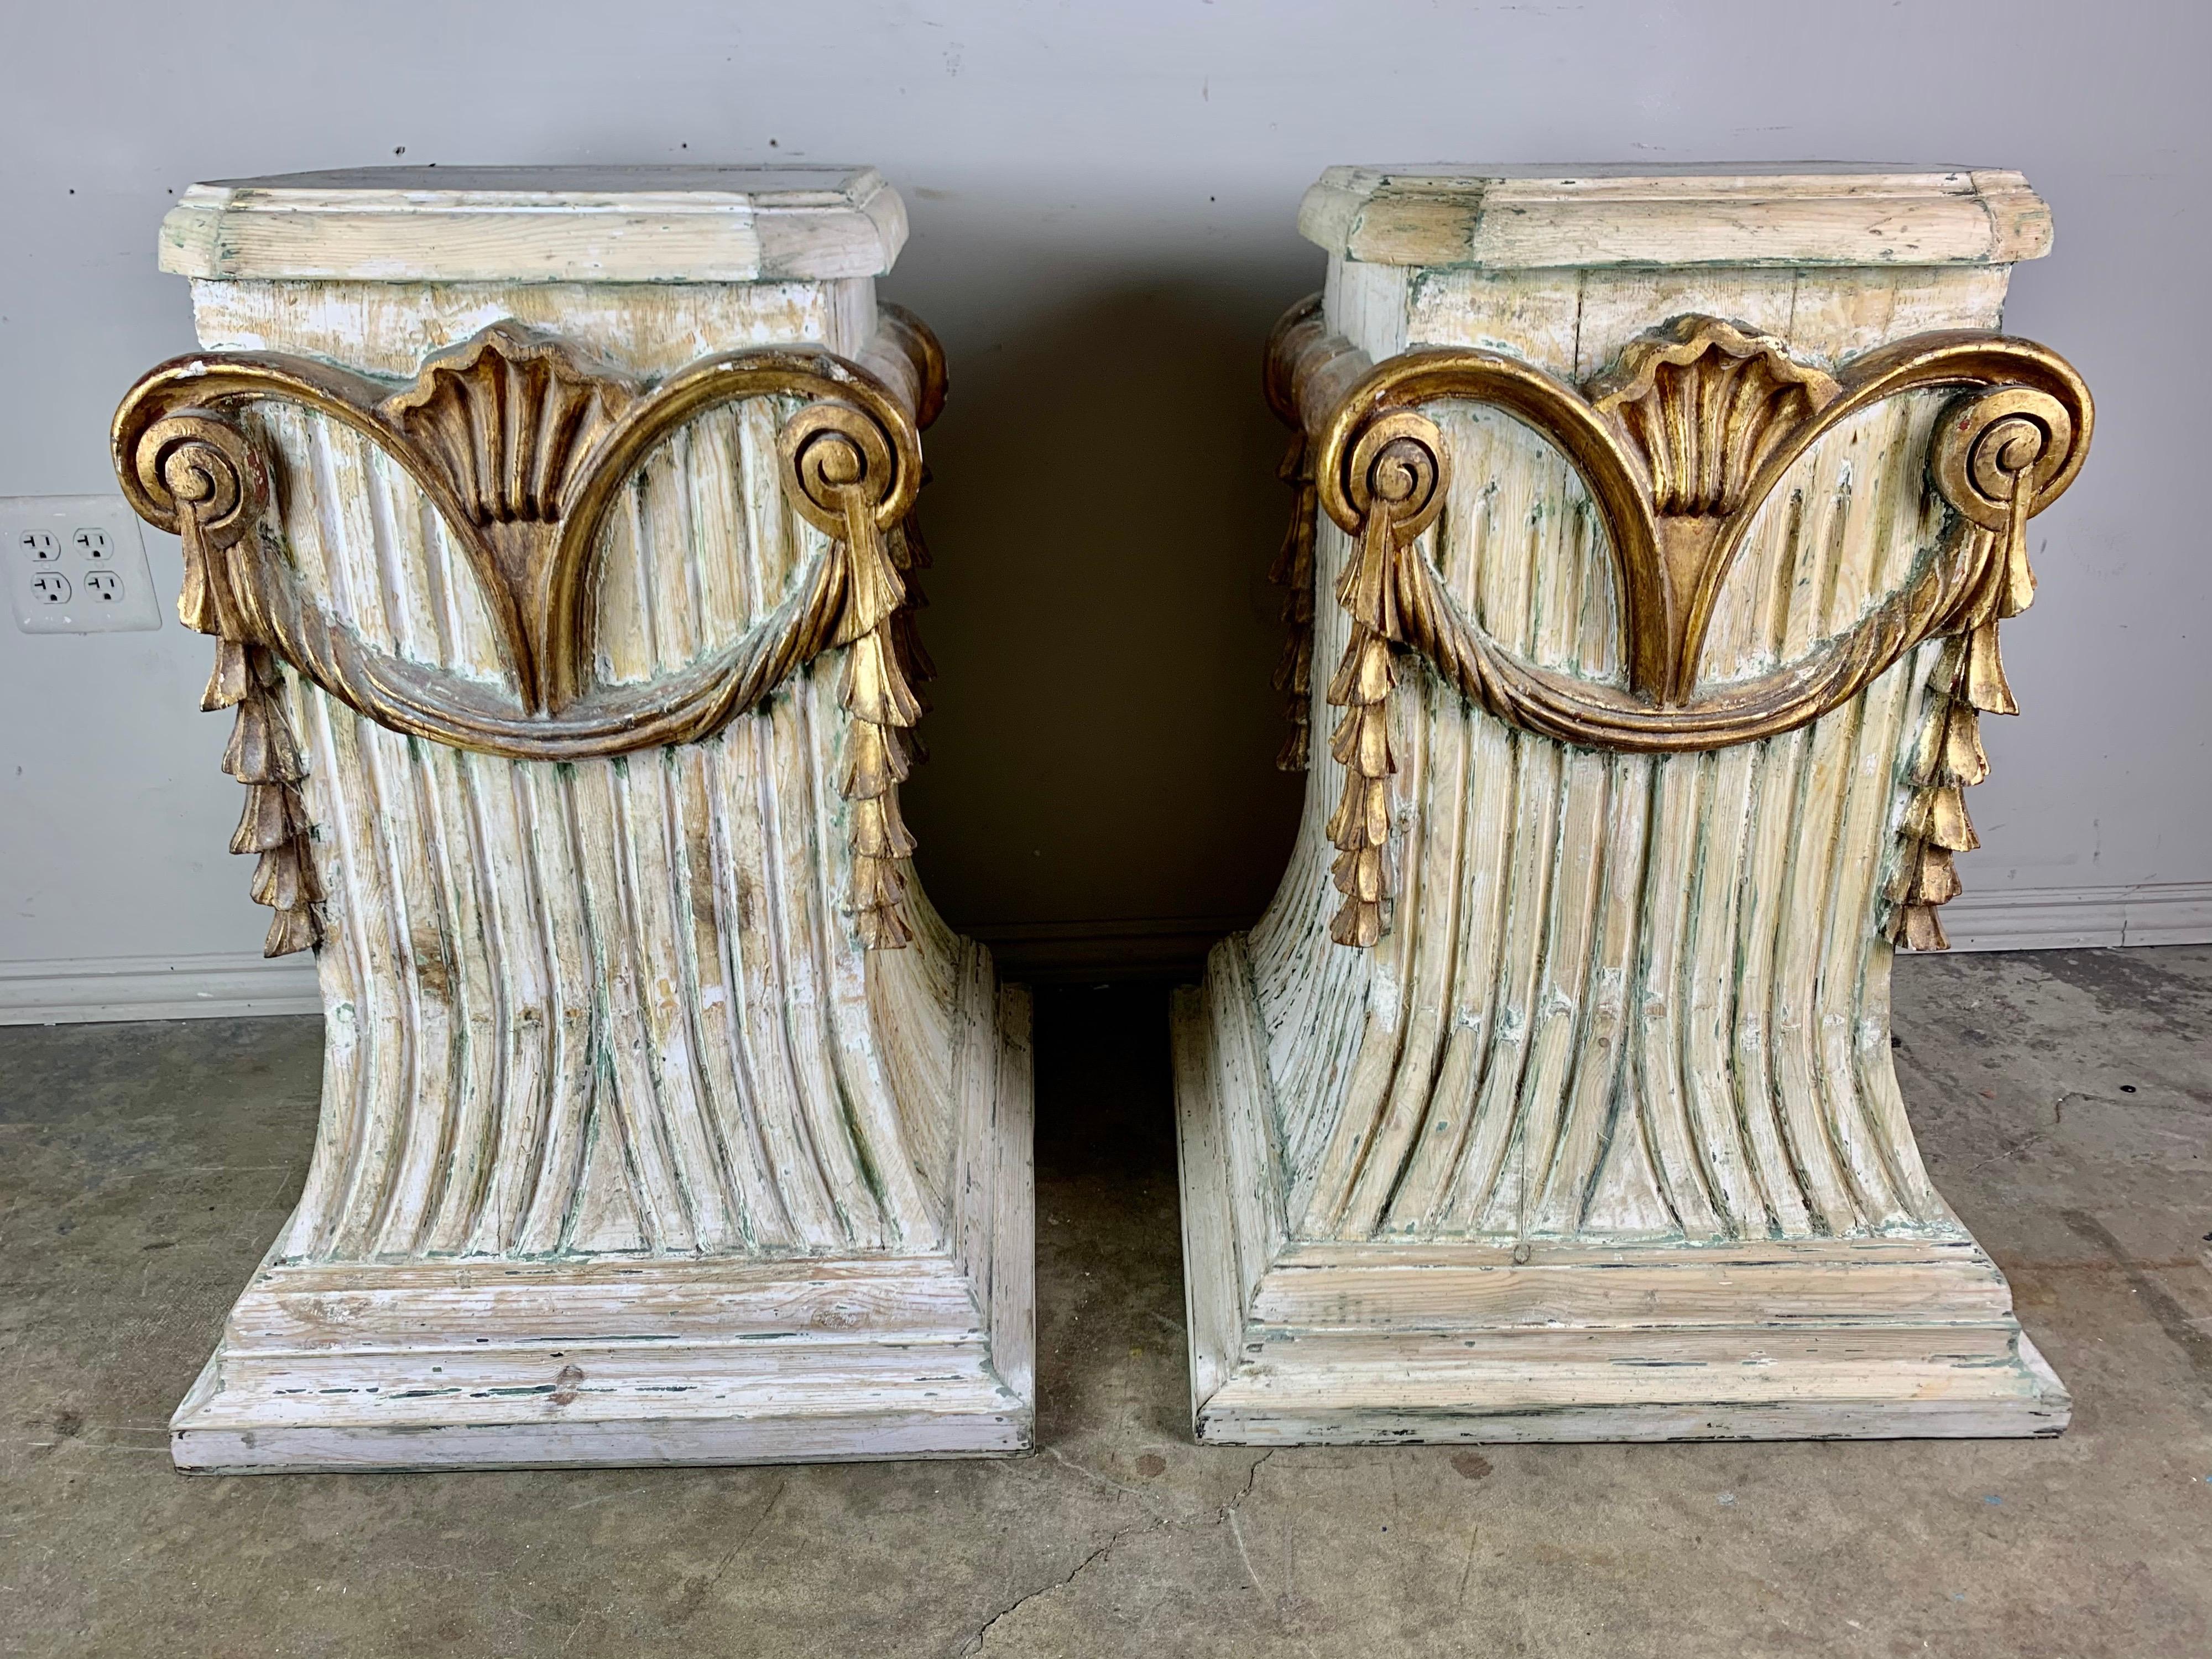 Pair of Italian carved painted and parcel gilt pedestals with parcel gilt details depicting a shell motif with garlands hanging from scrolled ends.